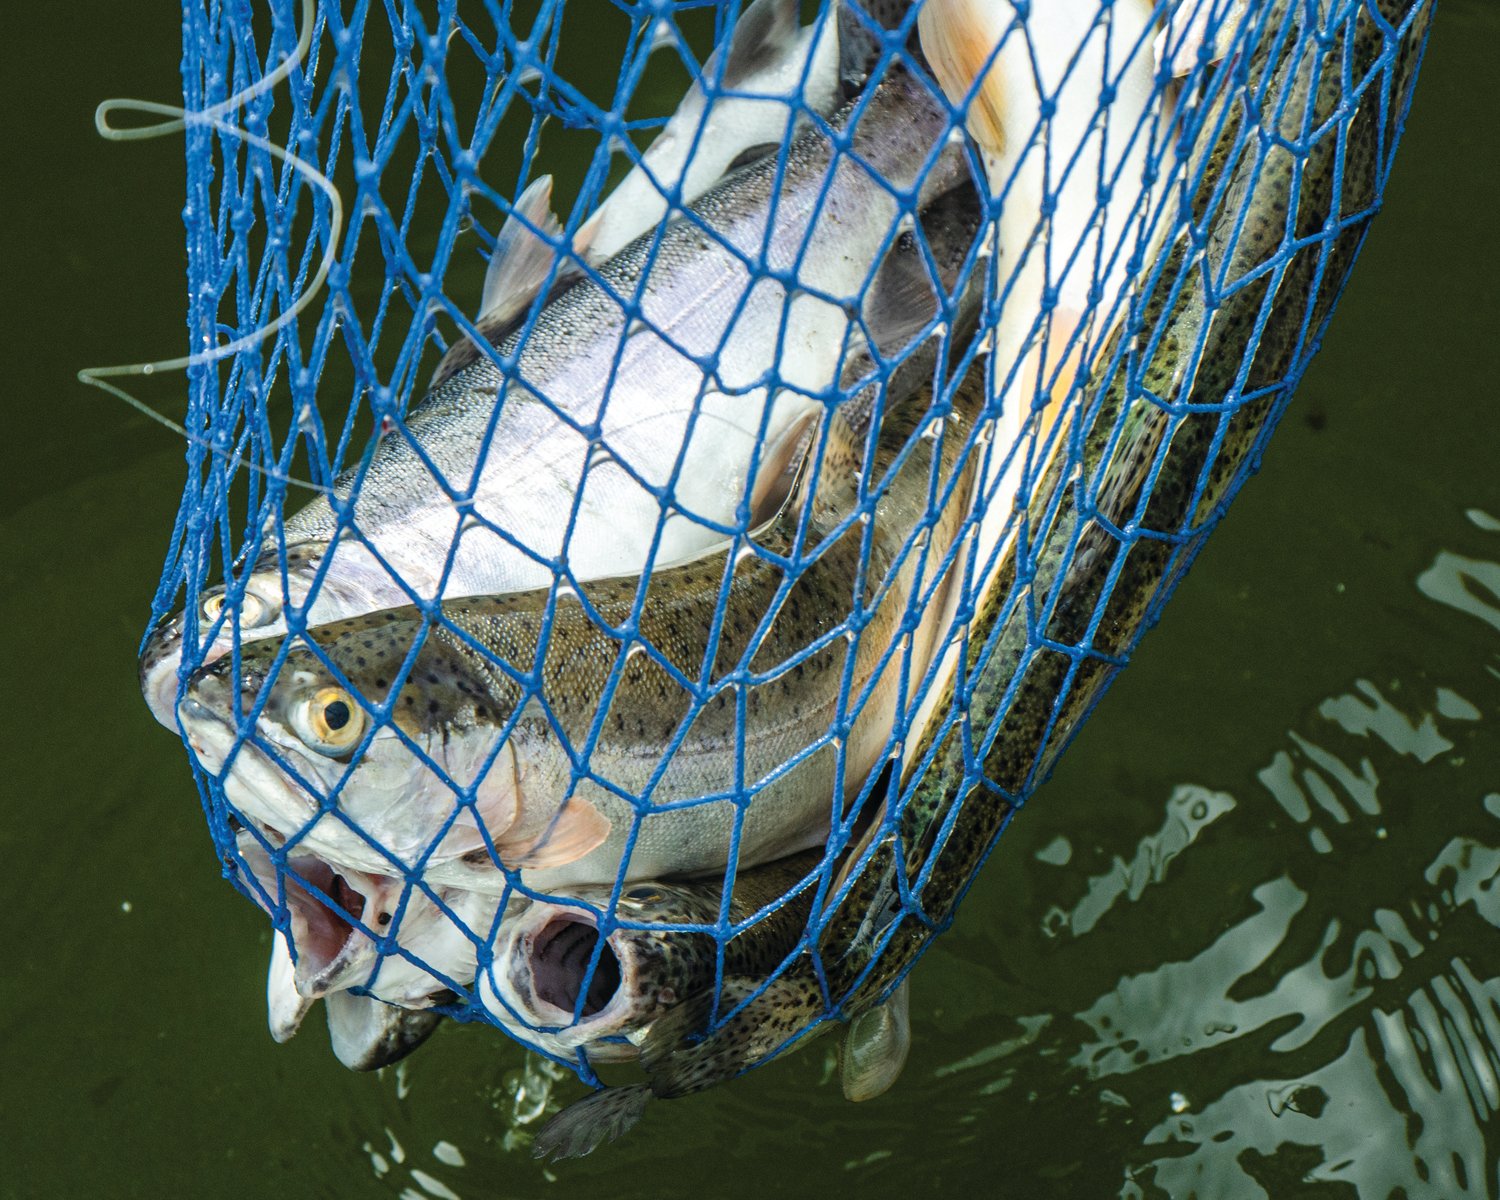 A catch of trout is held up on display in a net during the Mineral Lake Fishing Derby Saturday morning.